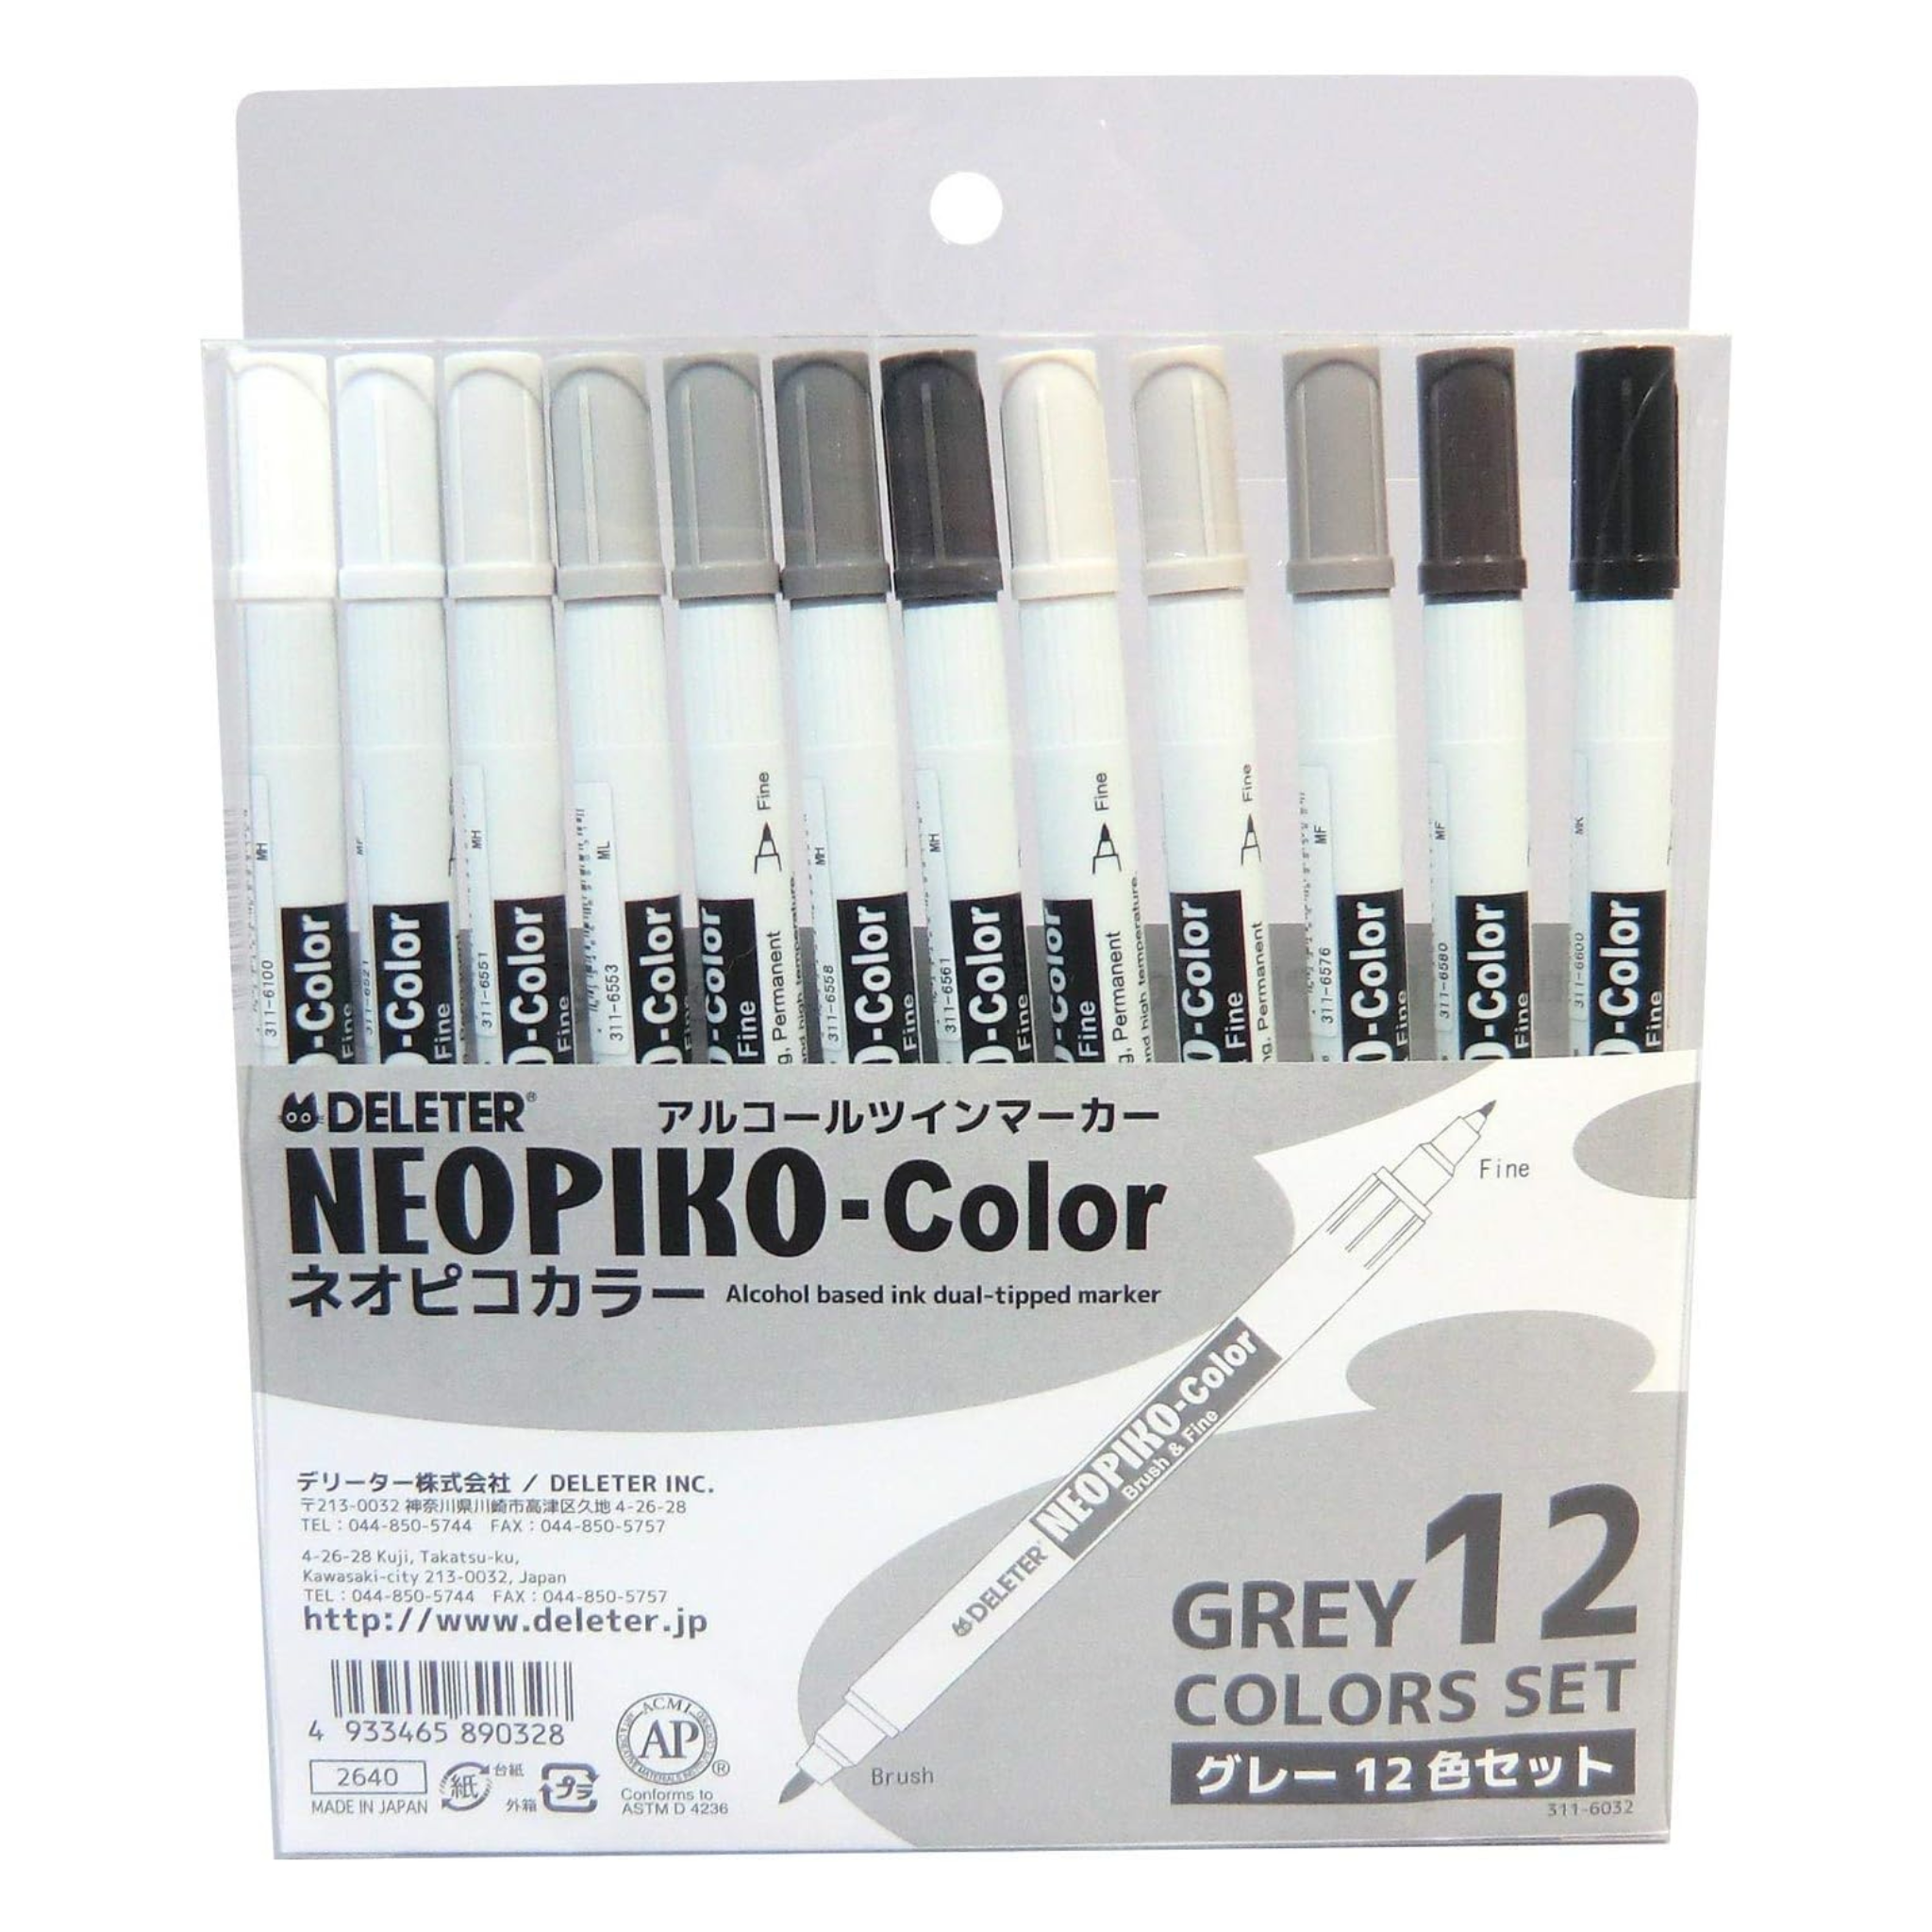 DELETER Neopiko Color, Grey 12 colors set